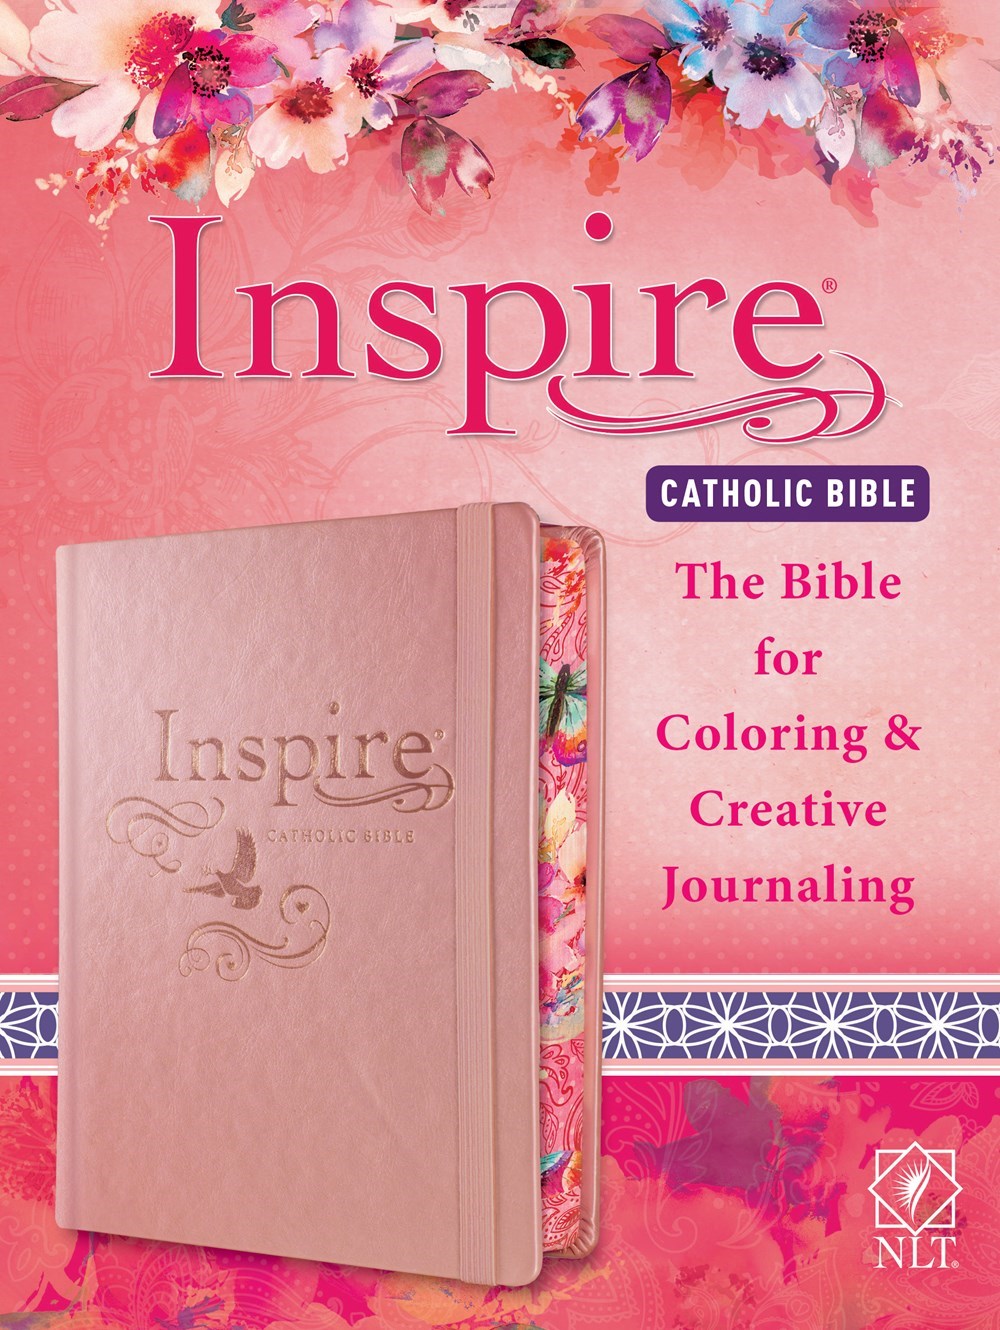 Seed of Abraham Christian Bookstore - (In)Courage - NLT Inspire Catholic Bible-Pink Hardcover